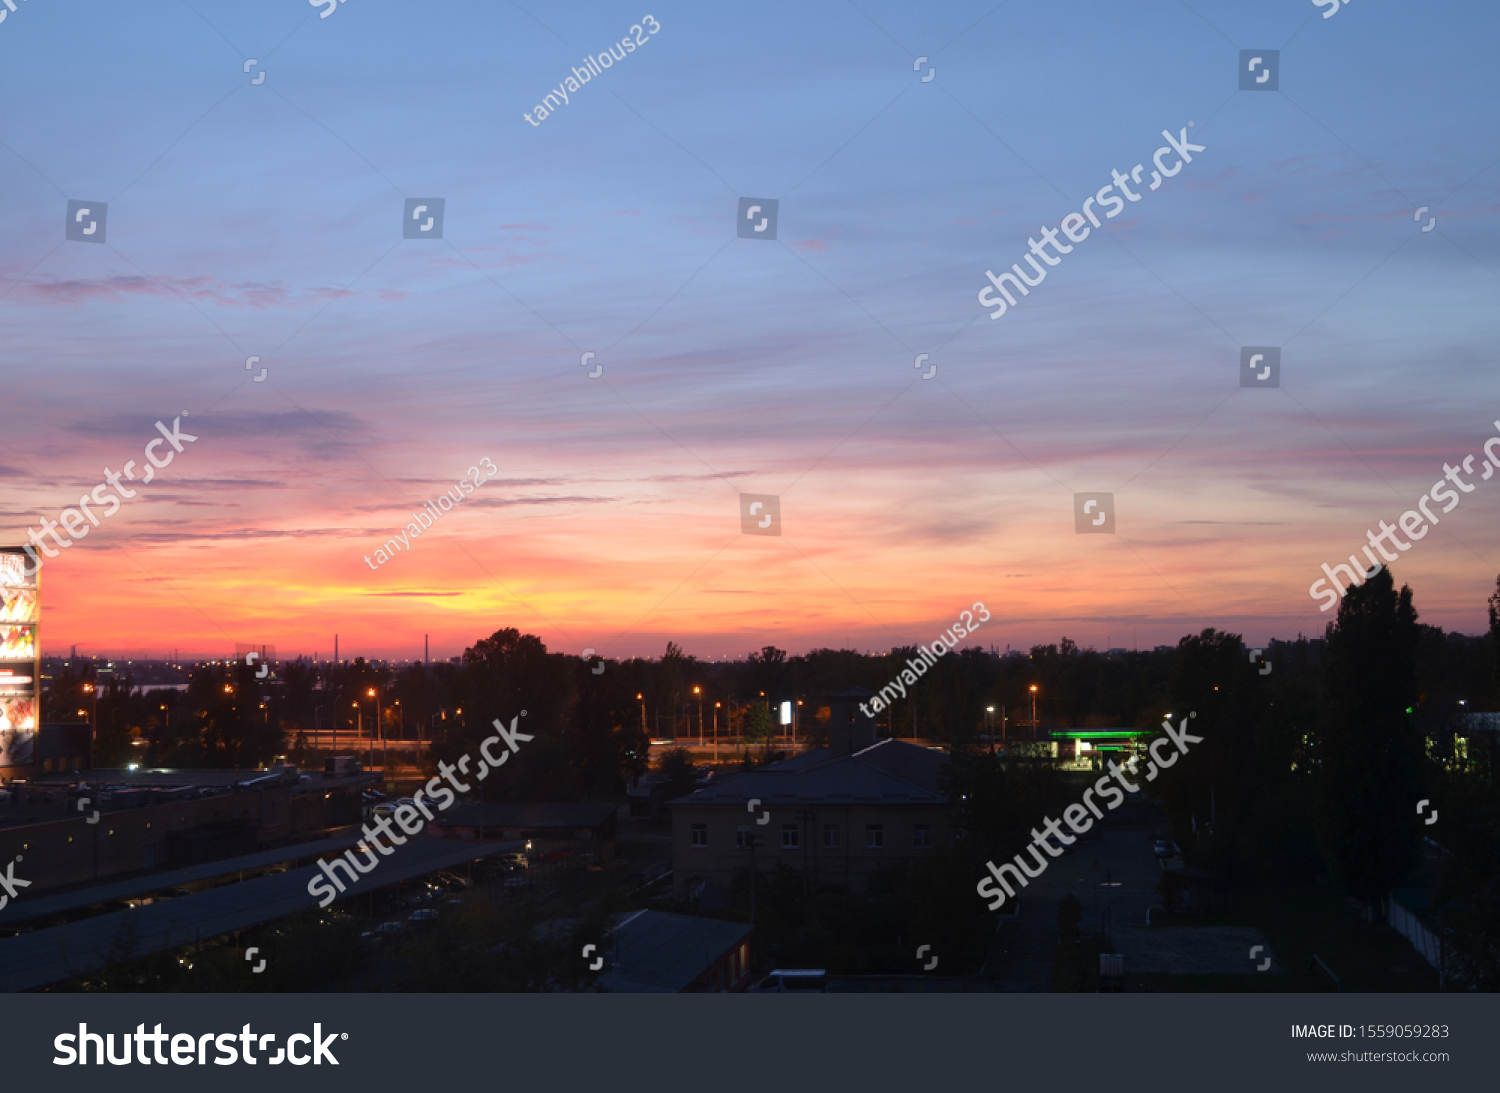 View of the dramatic sky above the sity at sunset with dark blue clouds and pink, purple and yellow flashes from the sun's rays #1559059283